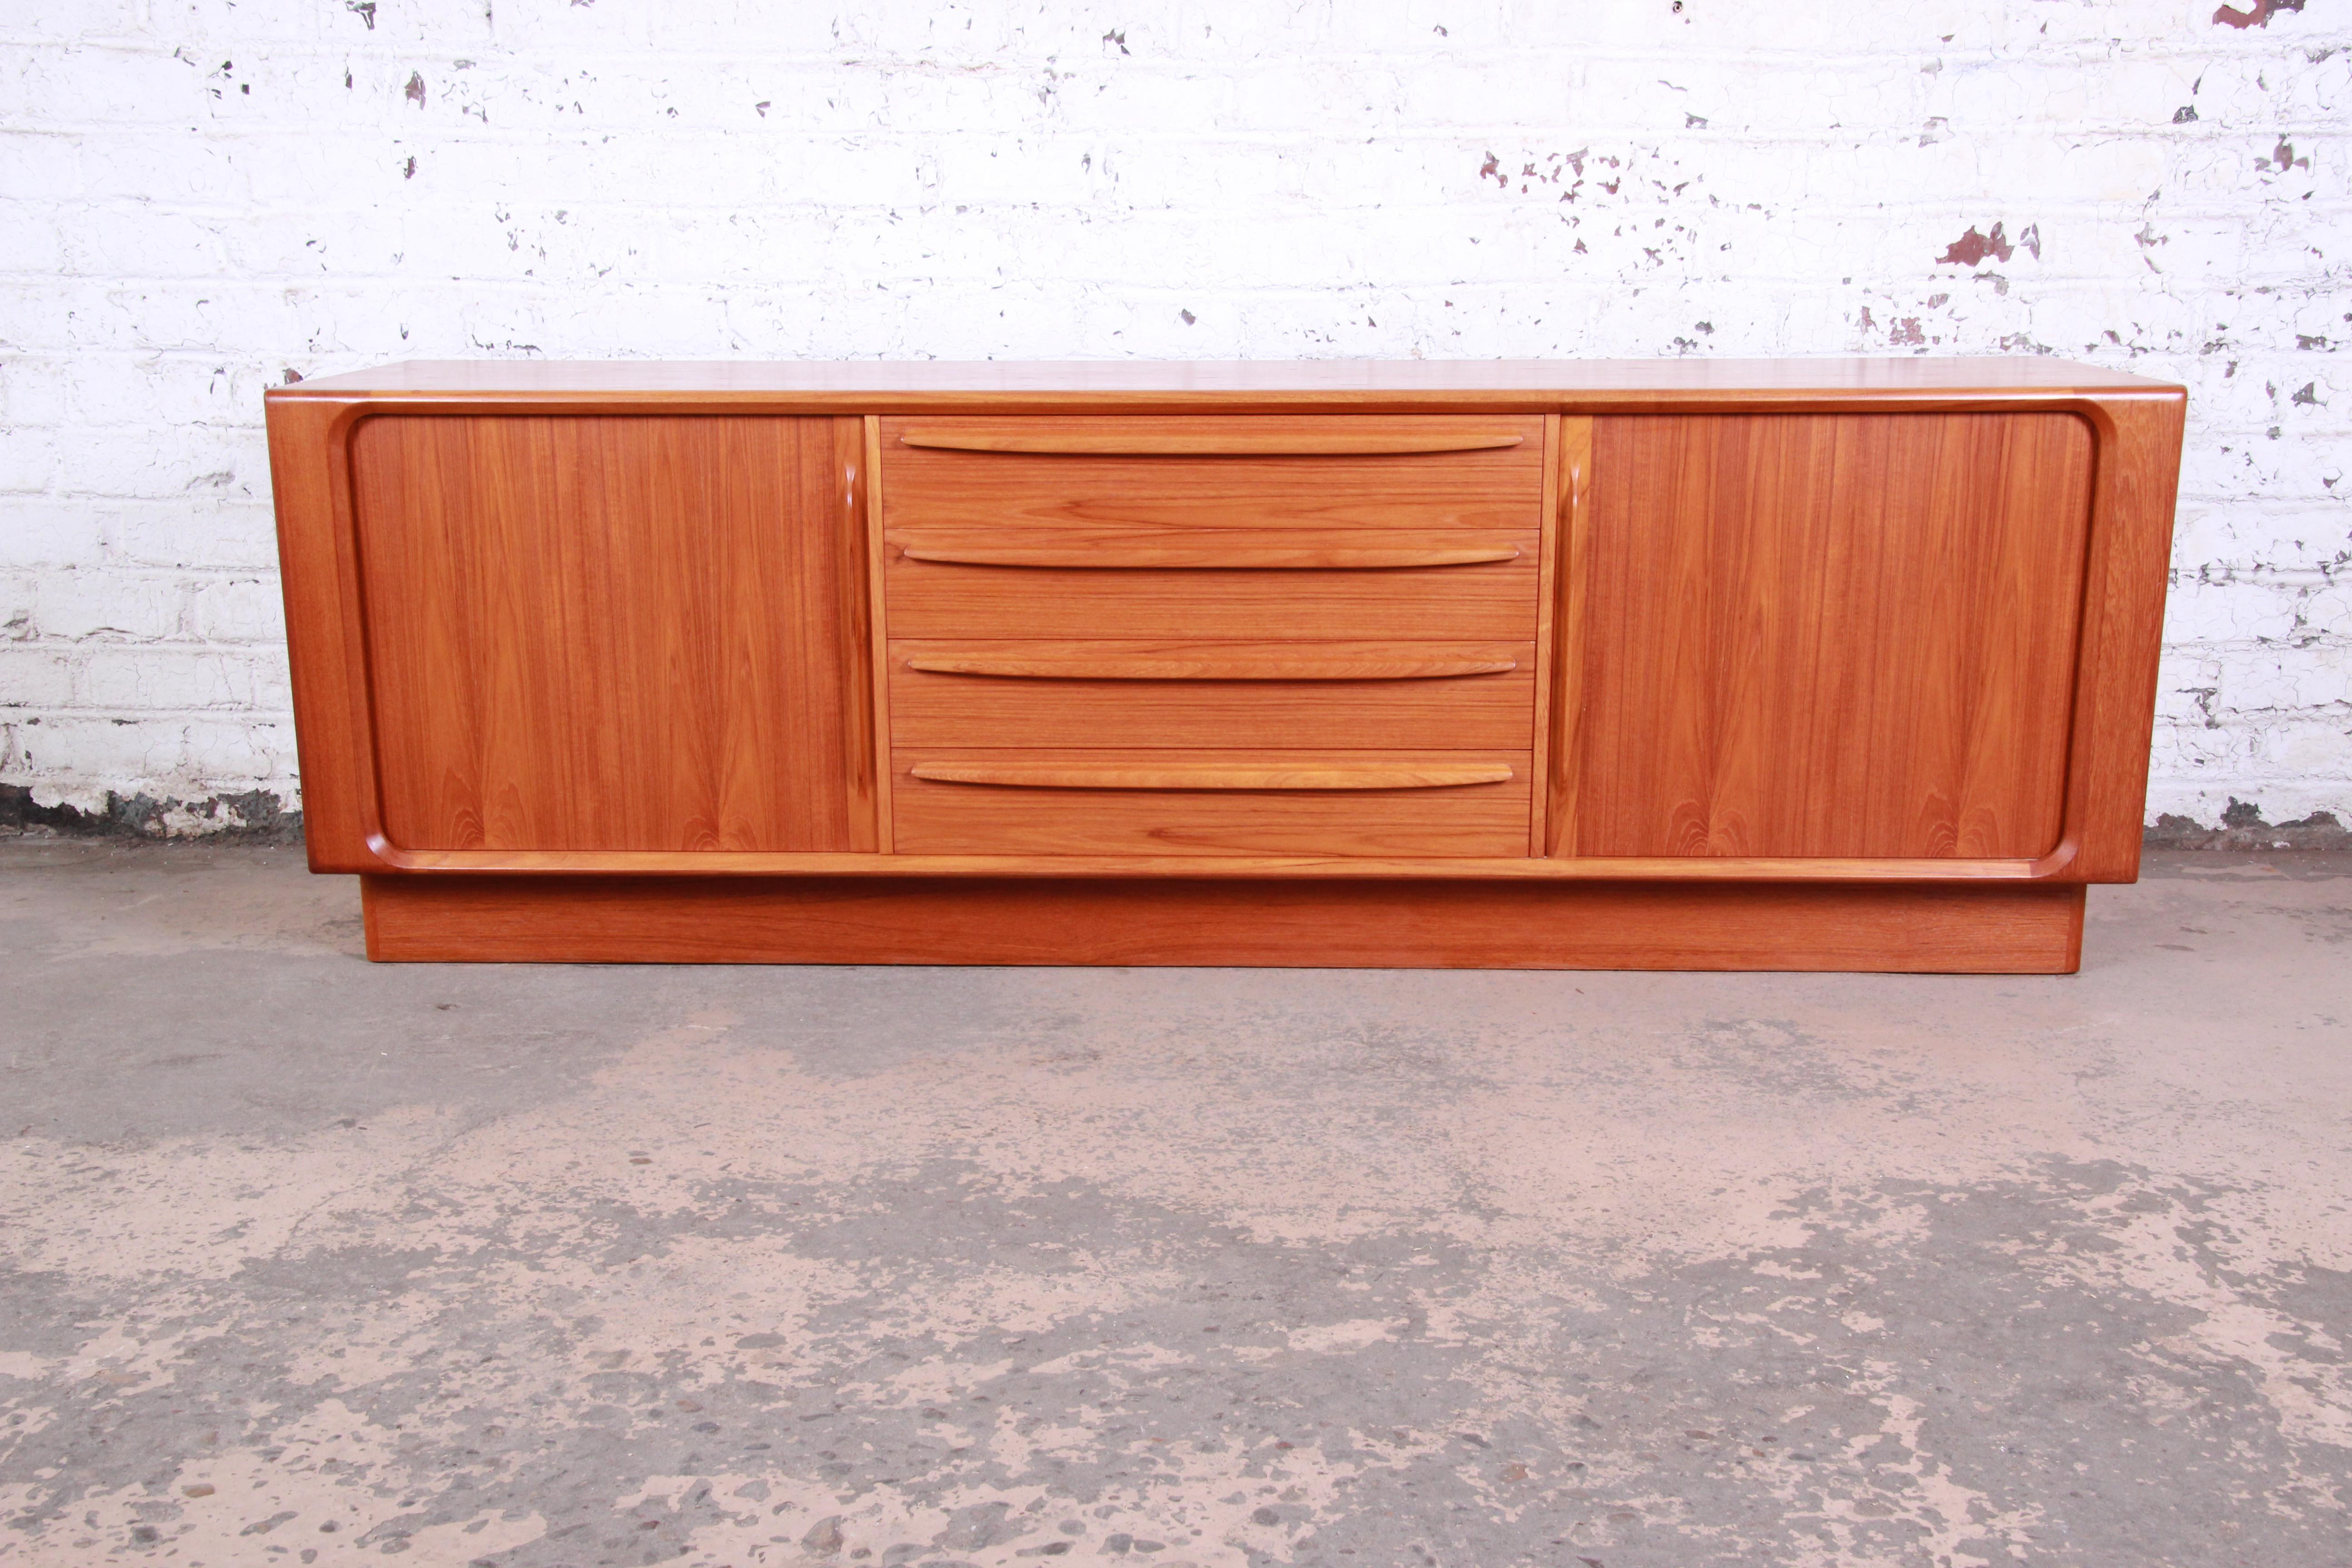 An exceptional midcentury Danish modern teak sideboard or credenza by Bernhard Pedersen & Son. The credenza features gorgeous teak wood grain and sleek Danish design. It offers ample storage, with seven dovetailed drawers and two shelves. The